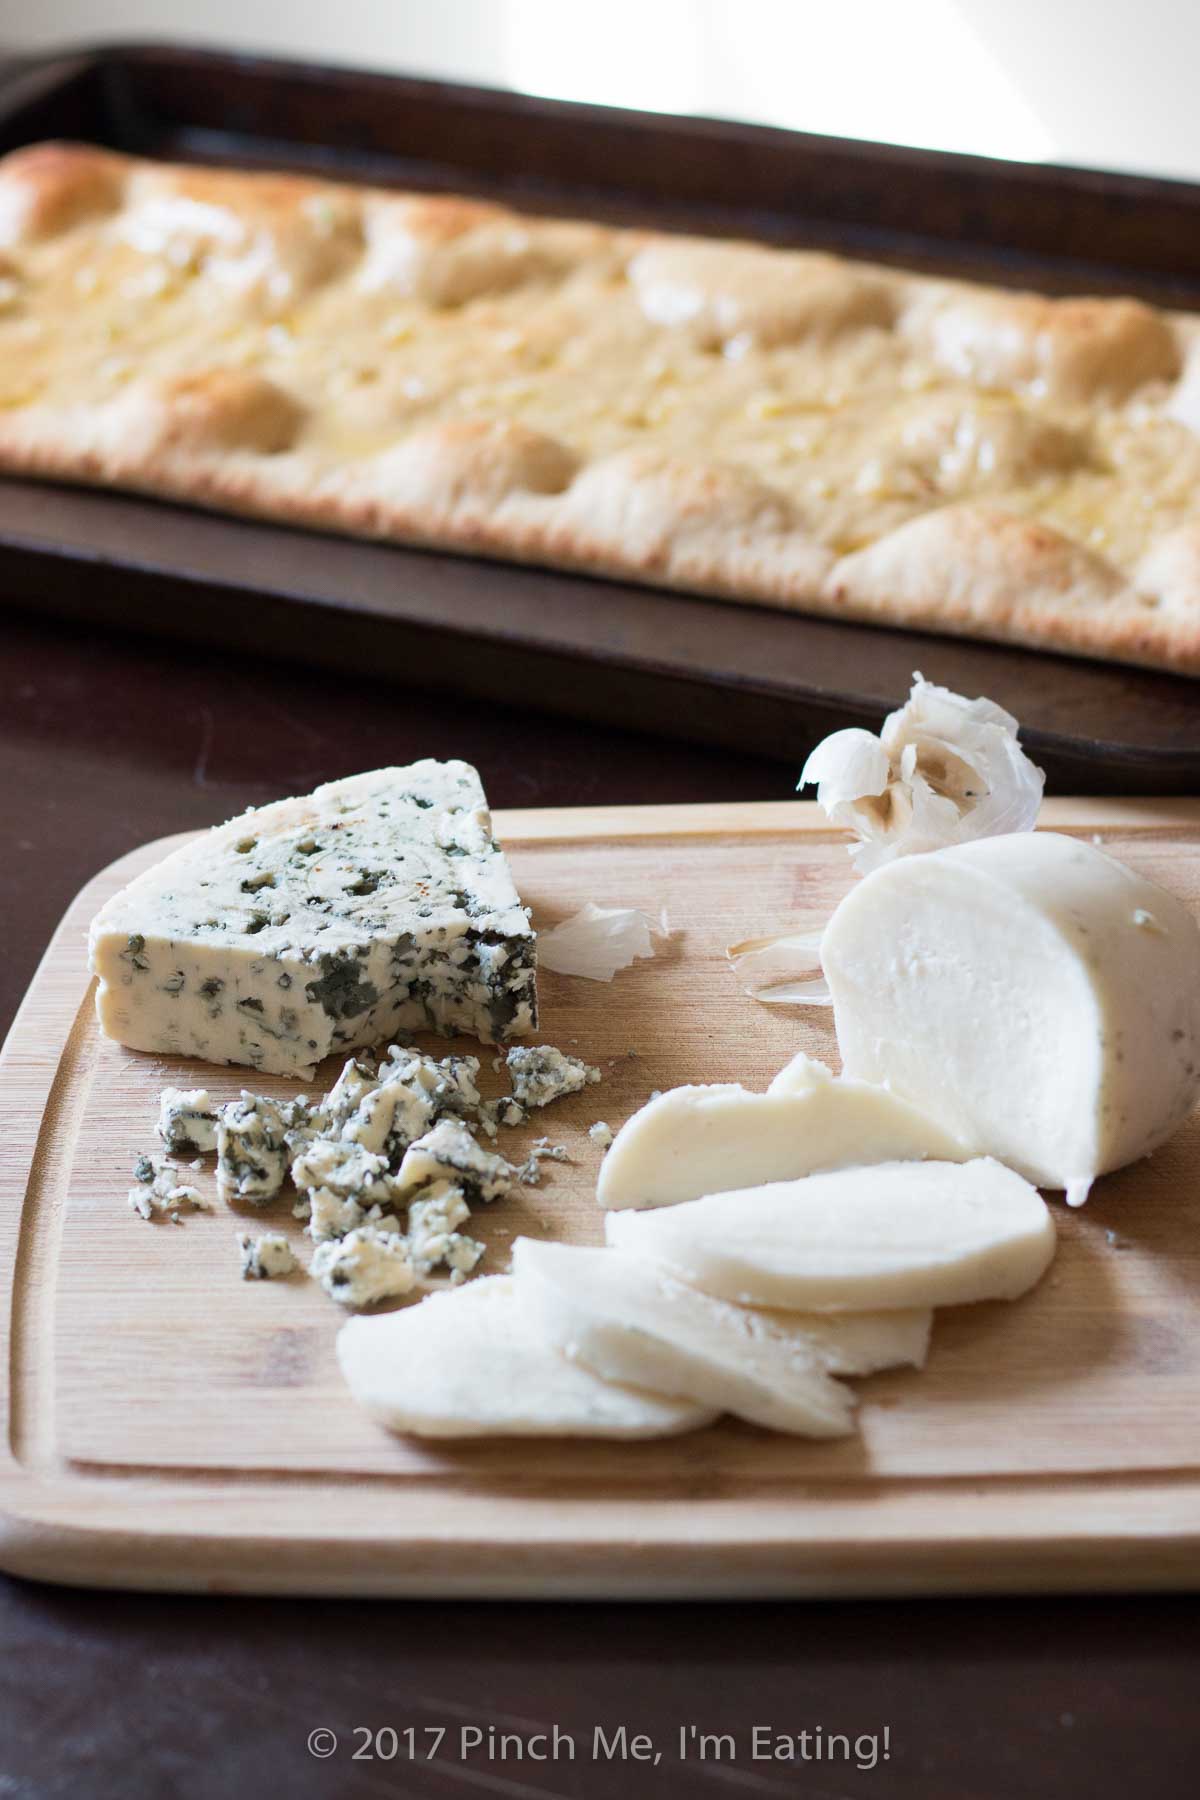 Blue cheese wedge and crumbles and fresh mozzarella cheese on a cutting board.